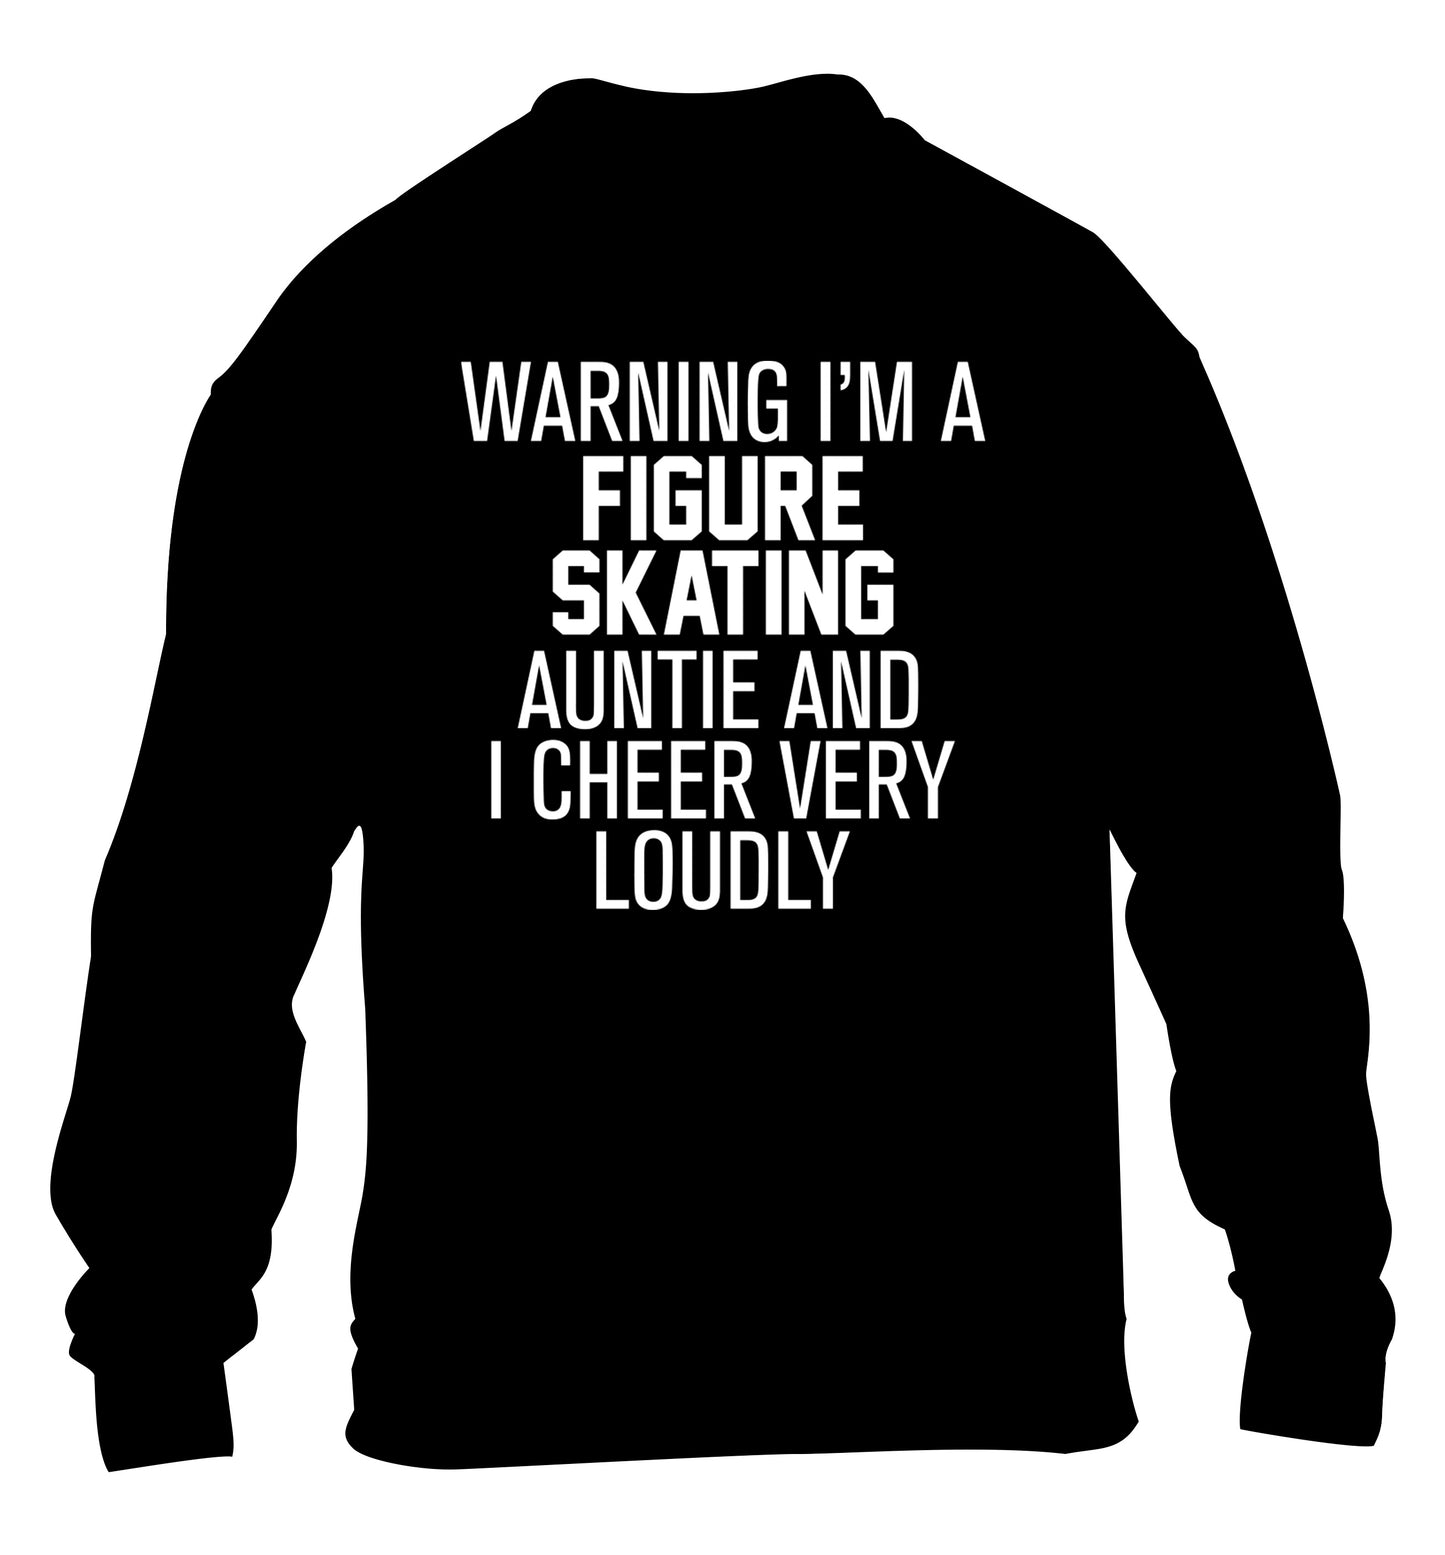 Warning I'm a figure skating auntie and I cheer very loudly children's black sweater 12-14 Years